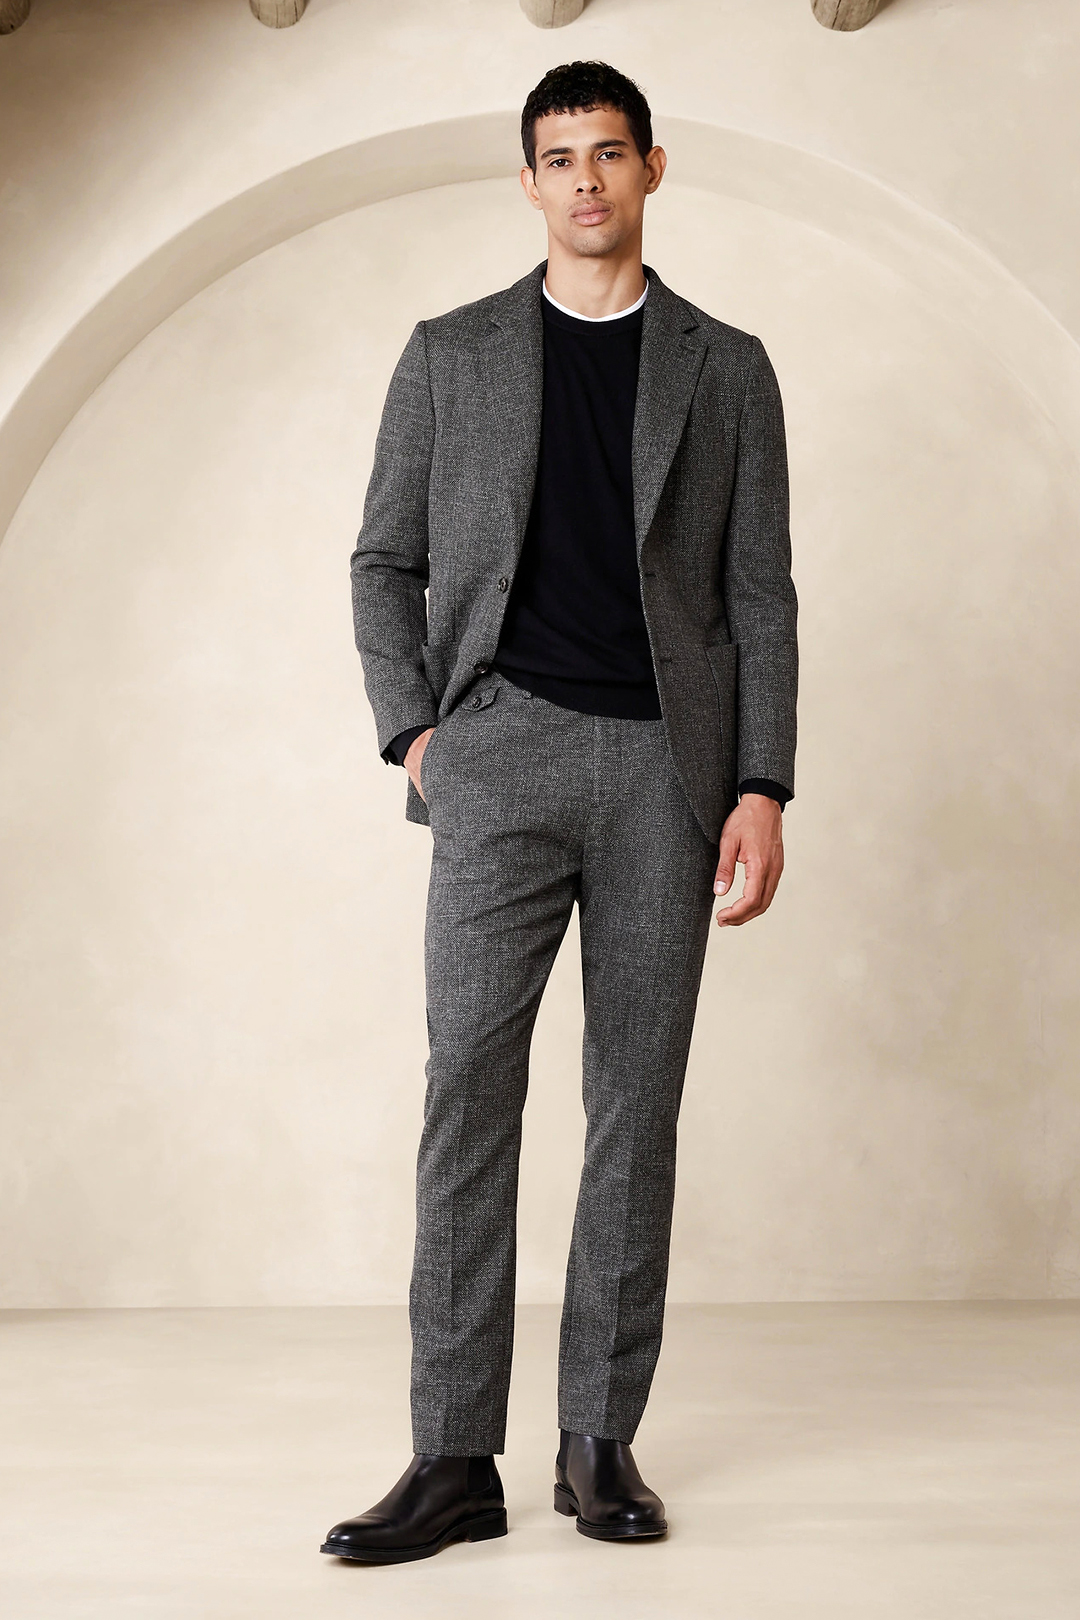 Charcoal suit, black crew neck sweater, and black Chelsea boots outfit